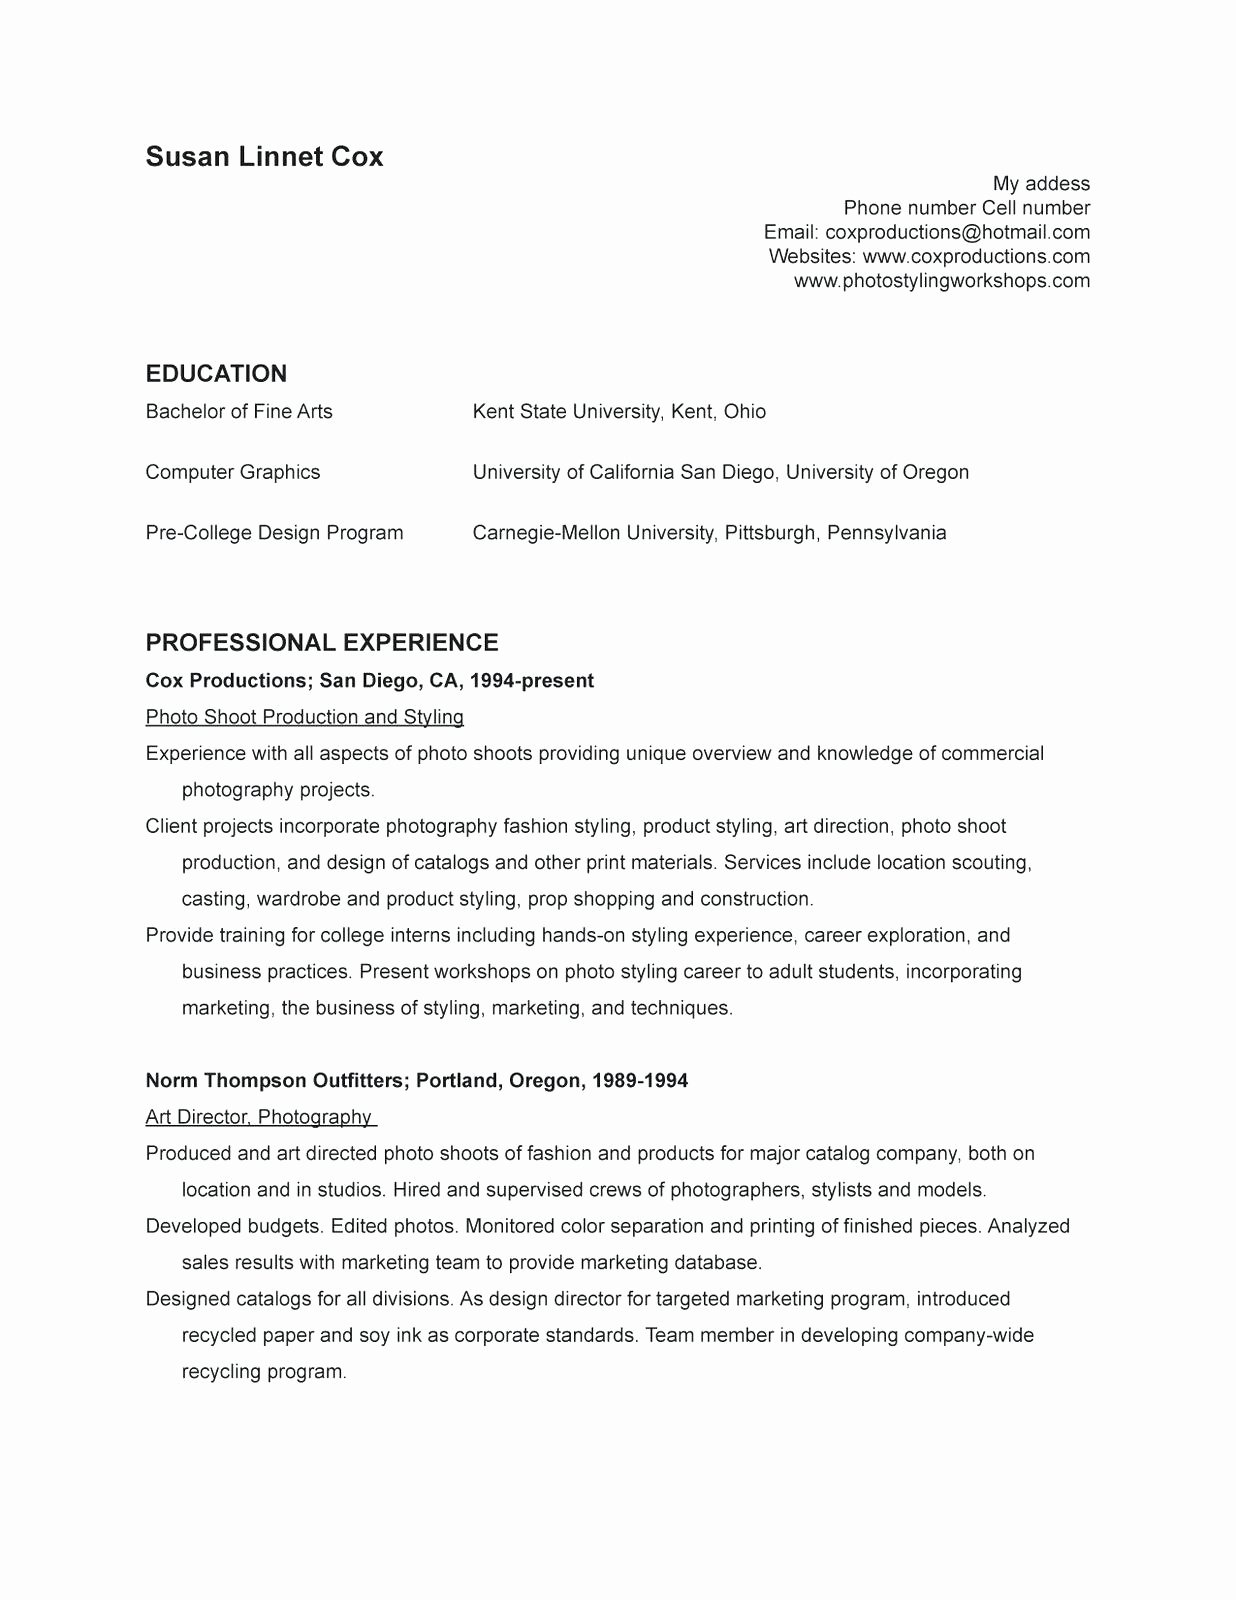 Resume Cover Letter and Resume Builder Hairstylist